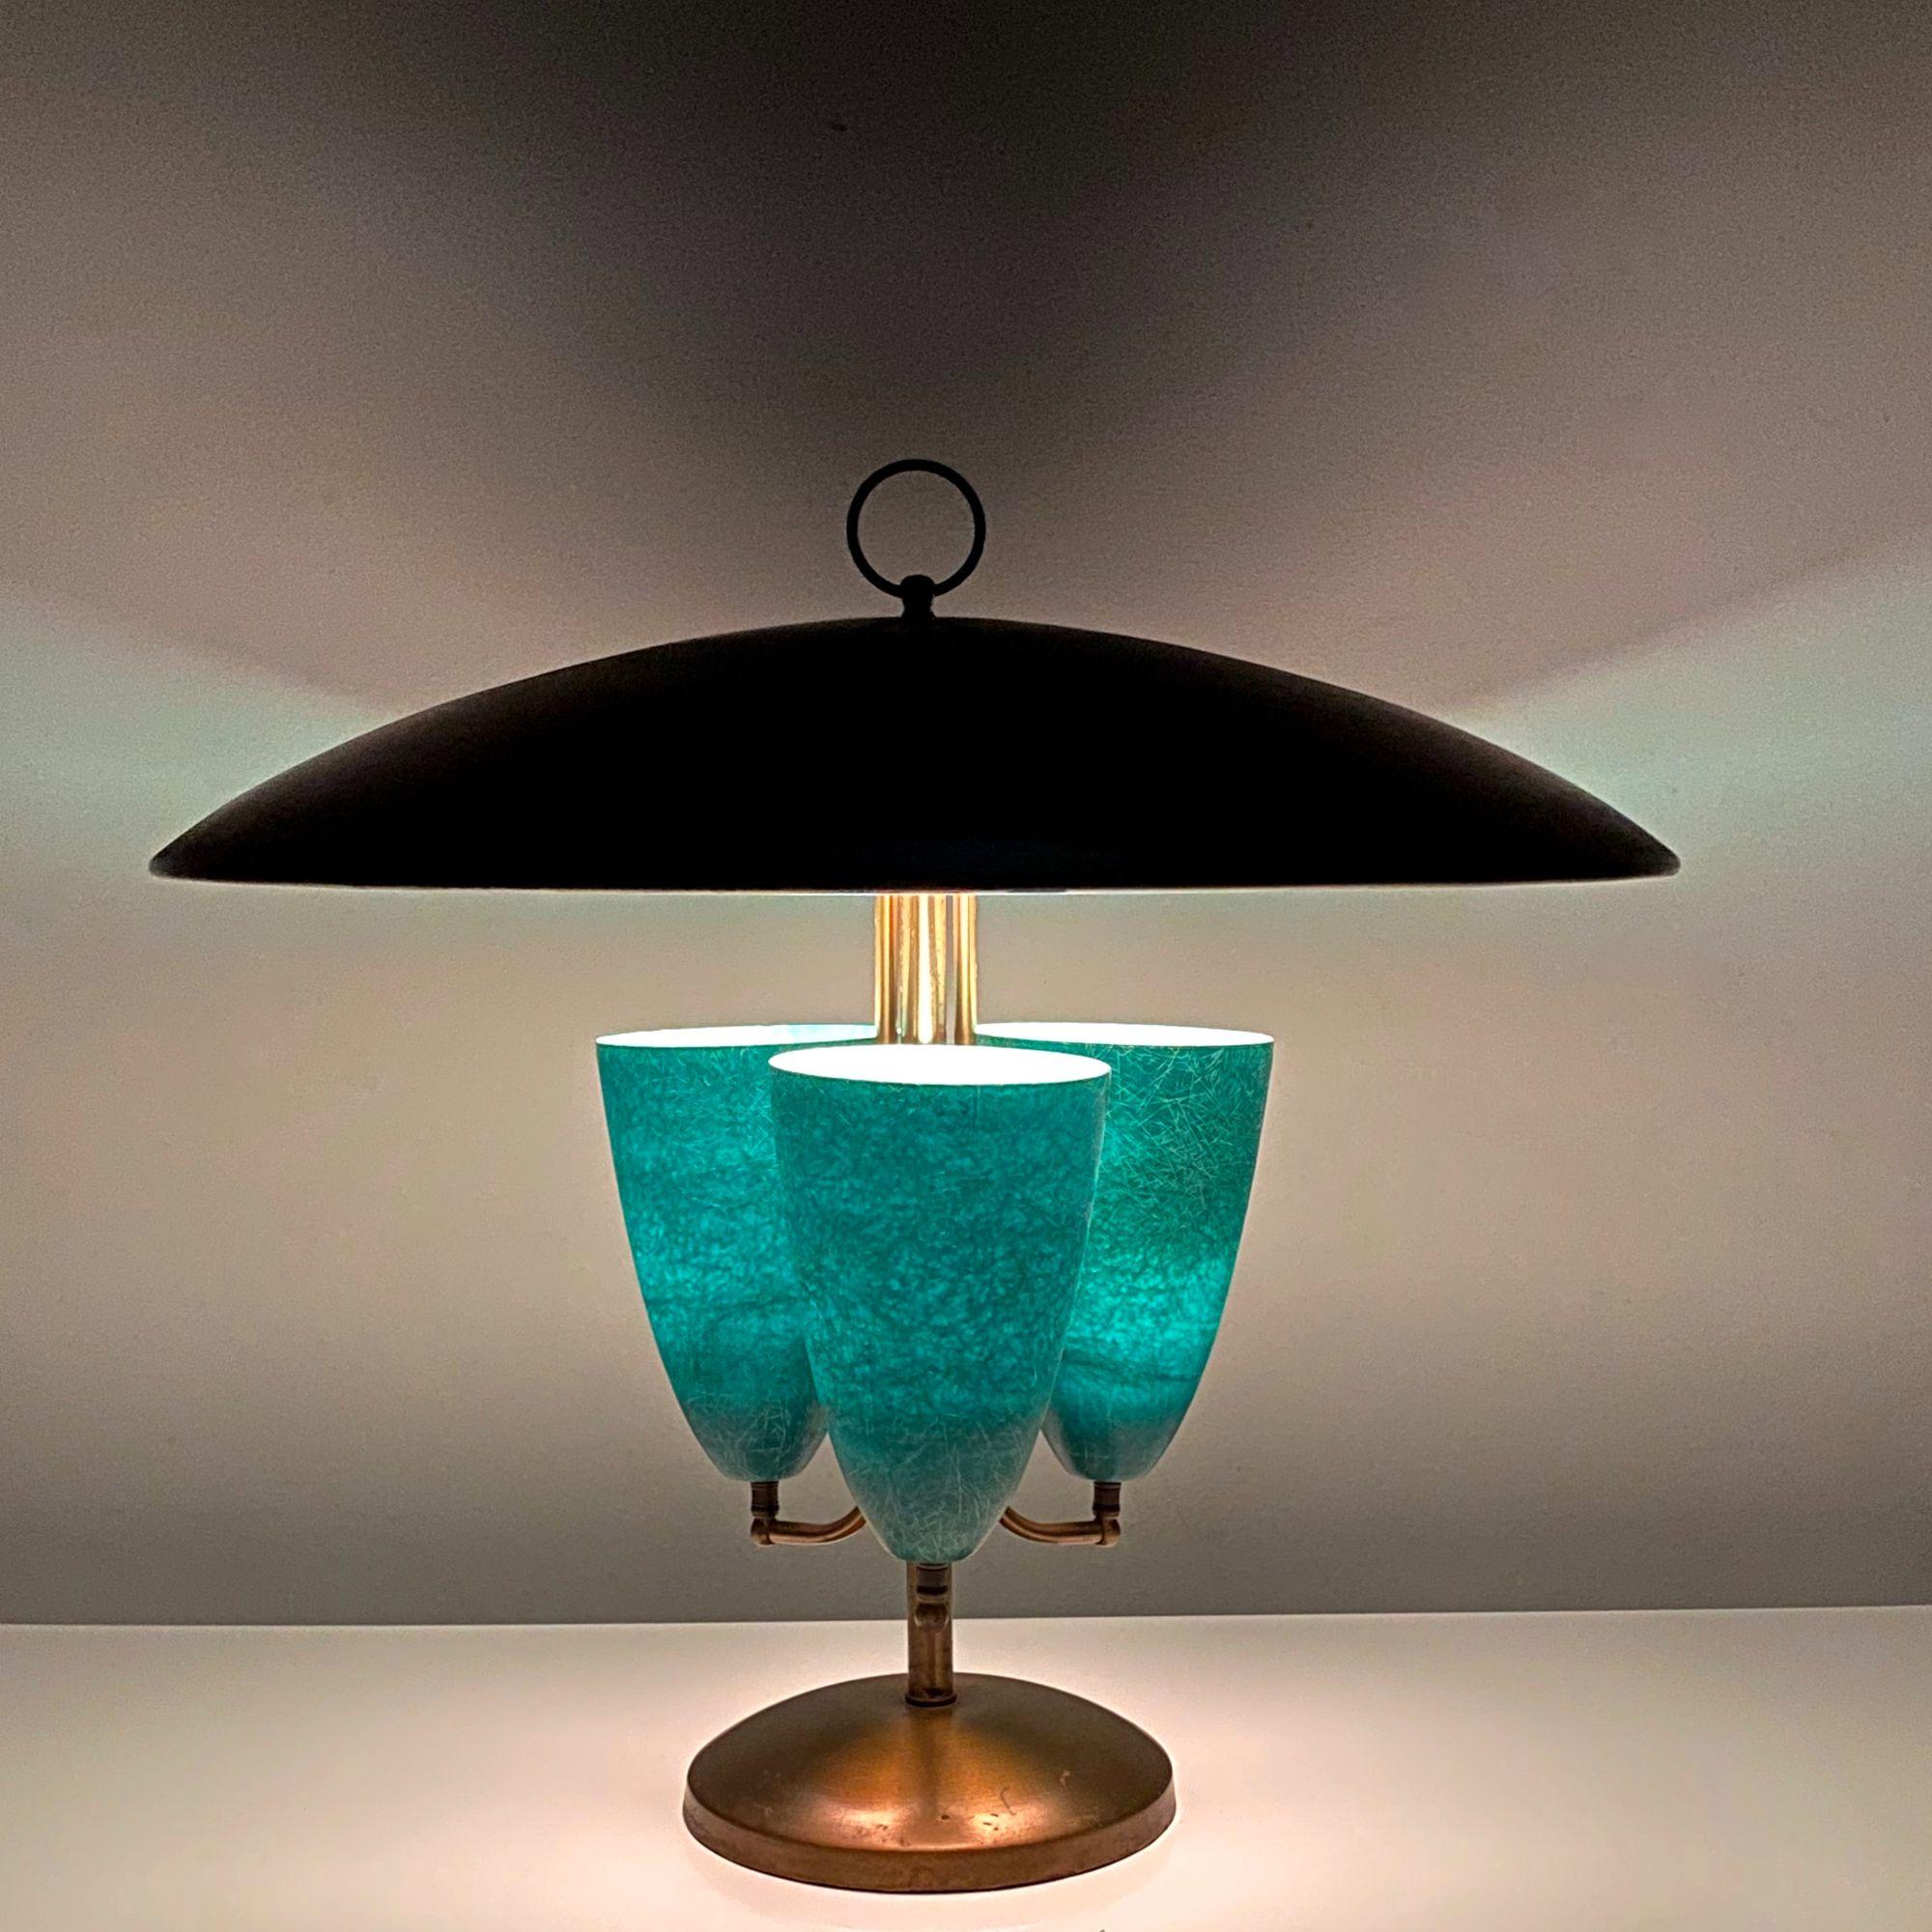 Large Modernist Brass Canopy Fiberglass Cone Table Lamp

Remarkable table lamp by Light House Lamp & Shade Co. of California c1950's.
Brass saucer shade with ring finial canopies a trio of jade green fiberglass cone uplighters, made by Marplex Co.